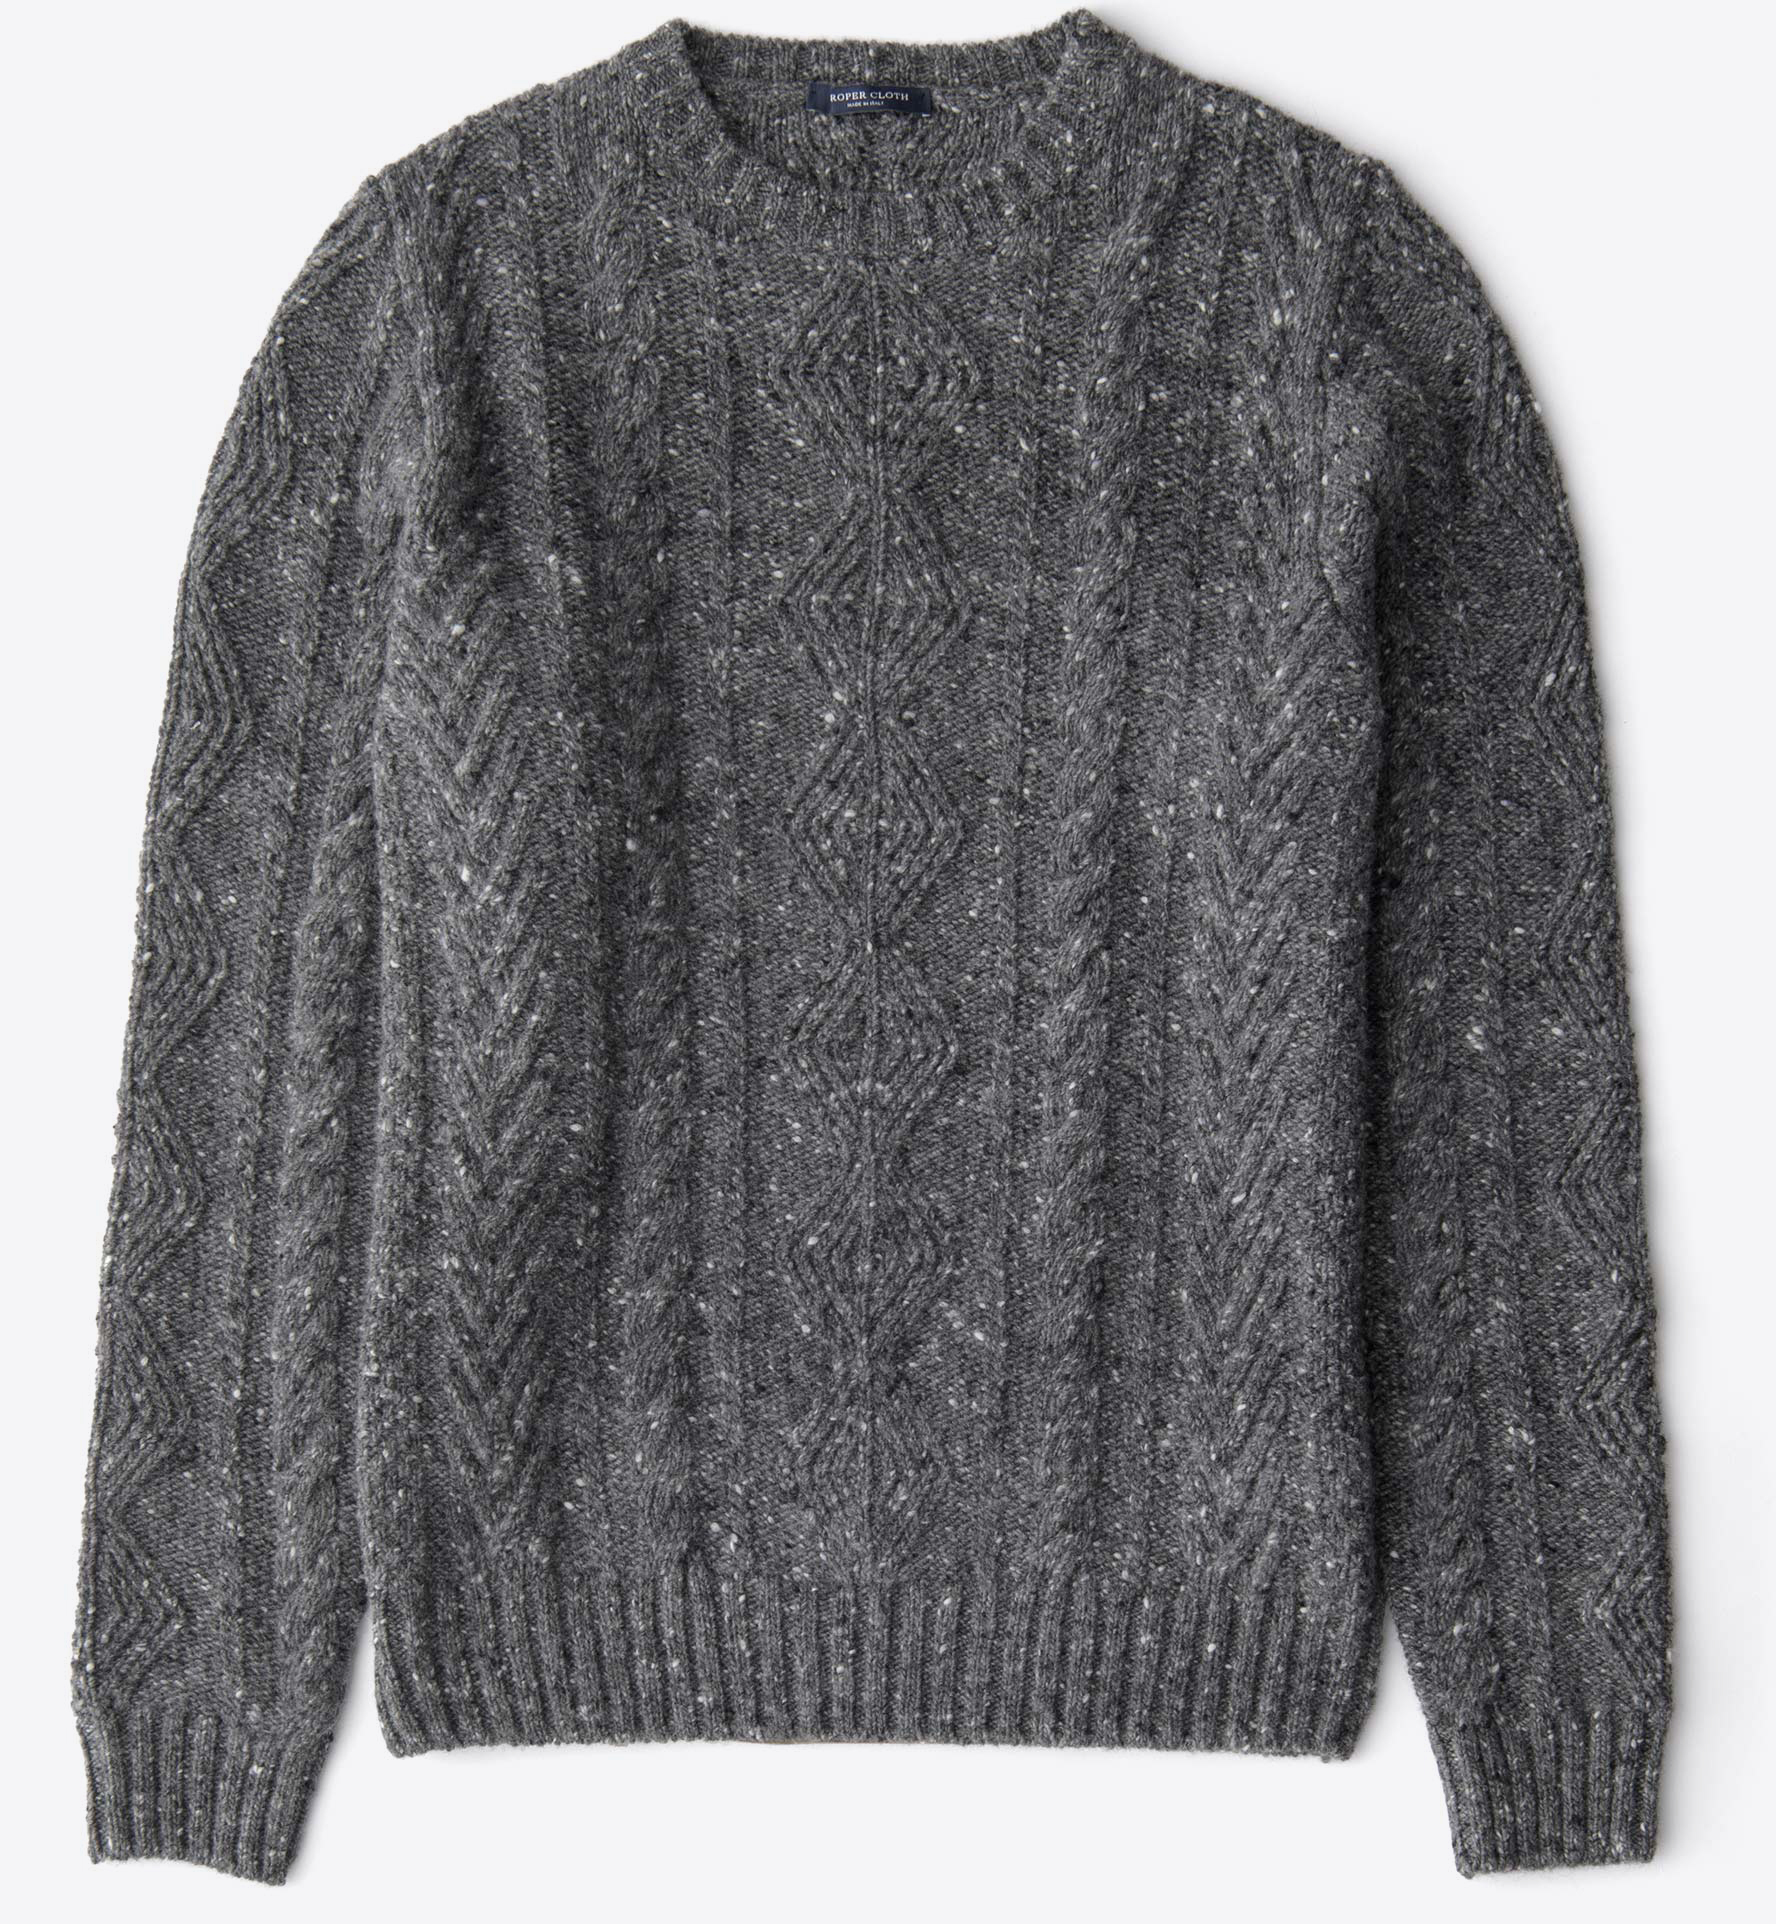 Zoom Image of Italian Grey Donegal Wool and Cashmere Aran Crewneck Sweater